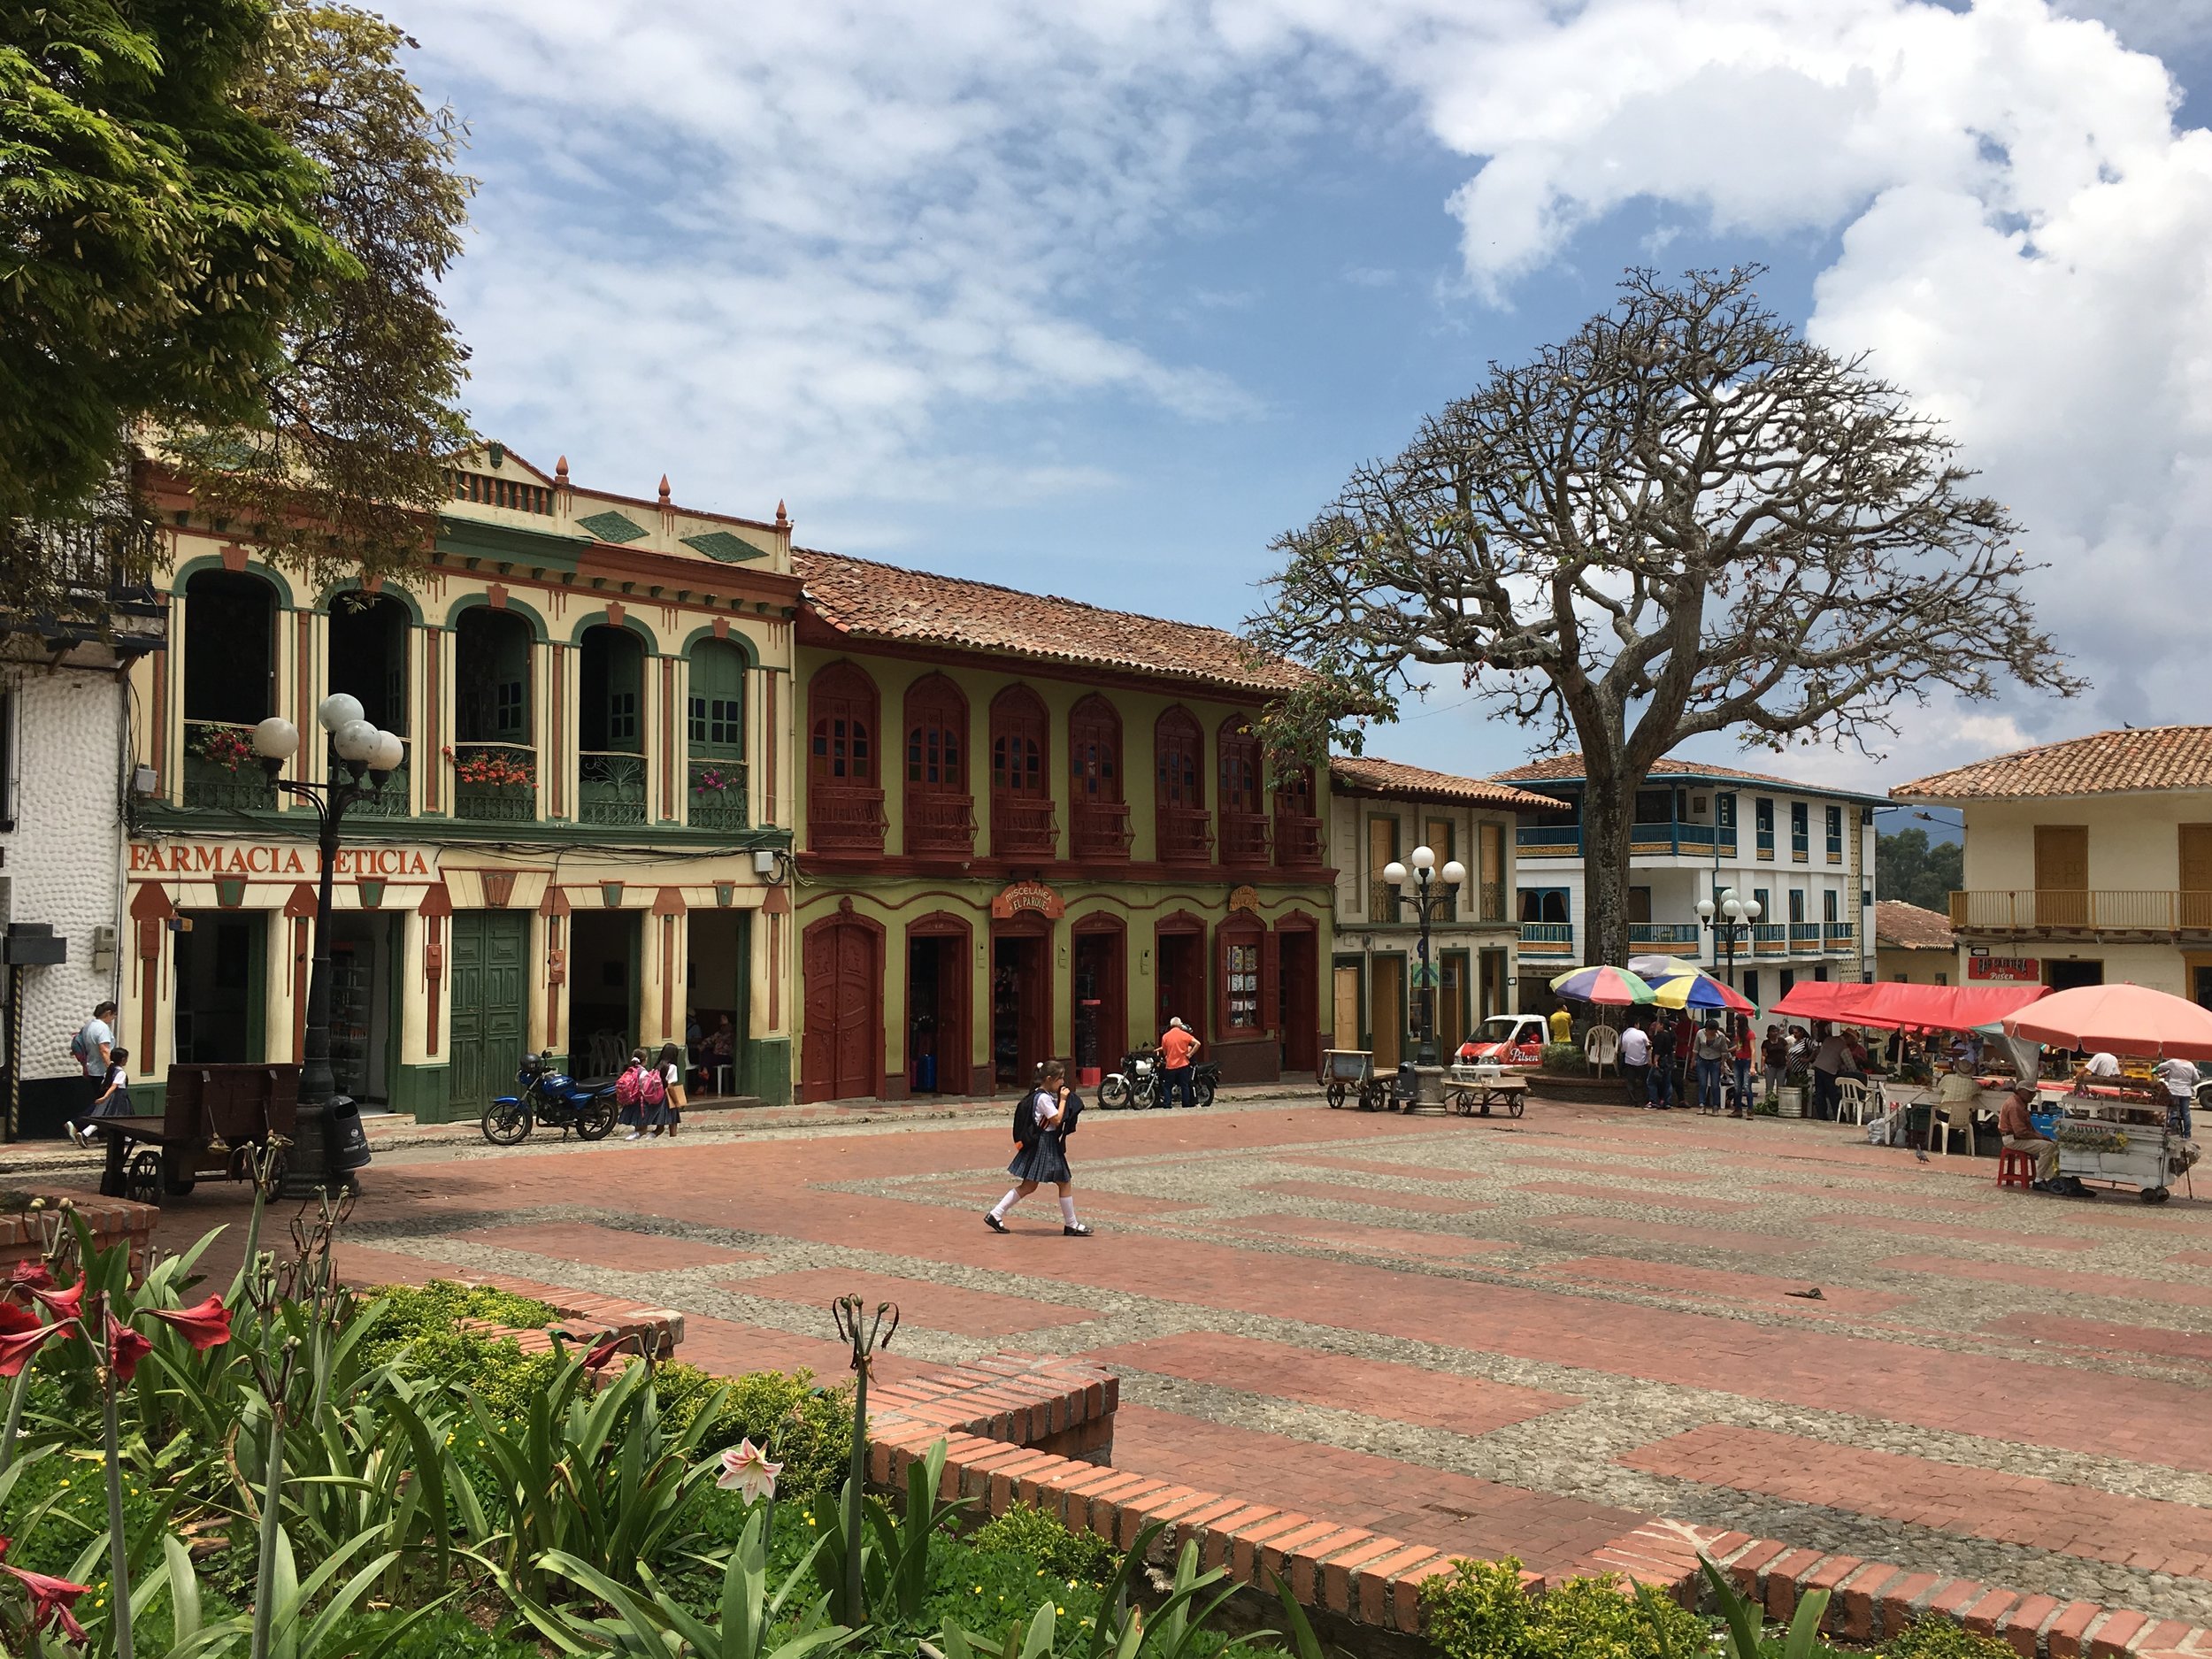 Buildings in Colombia